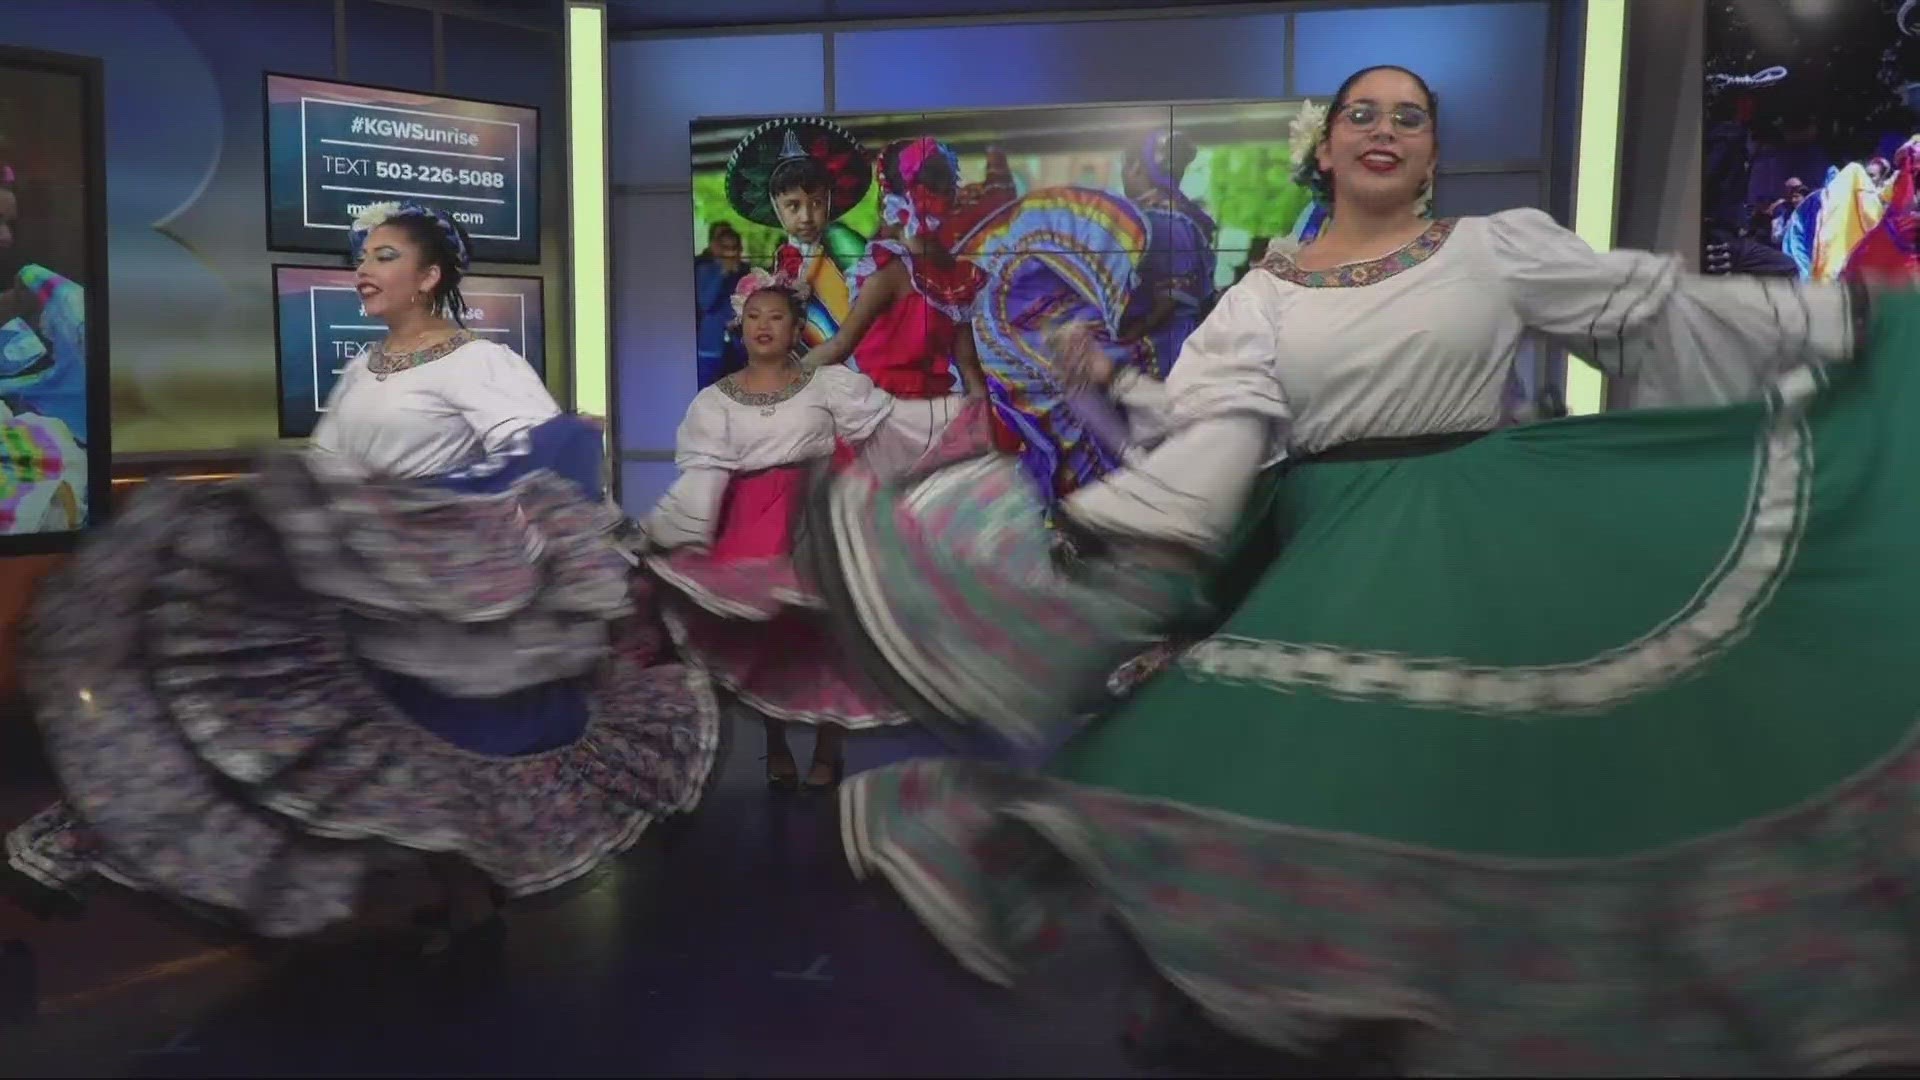 Dancers dropped by the KGW studio to preview El Grito, being celebrated Friday and Saturday at the Rose Quarter commons.